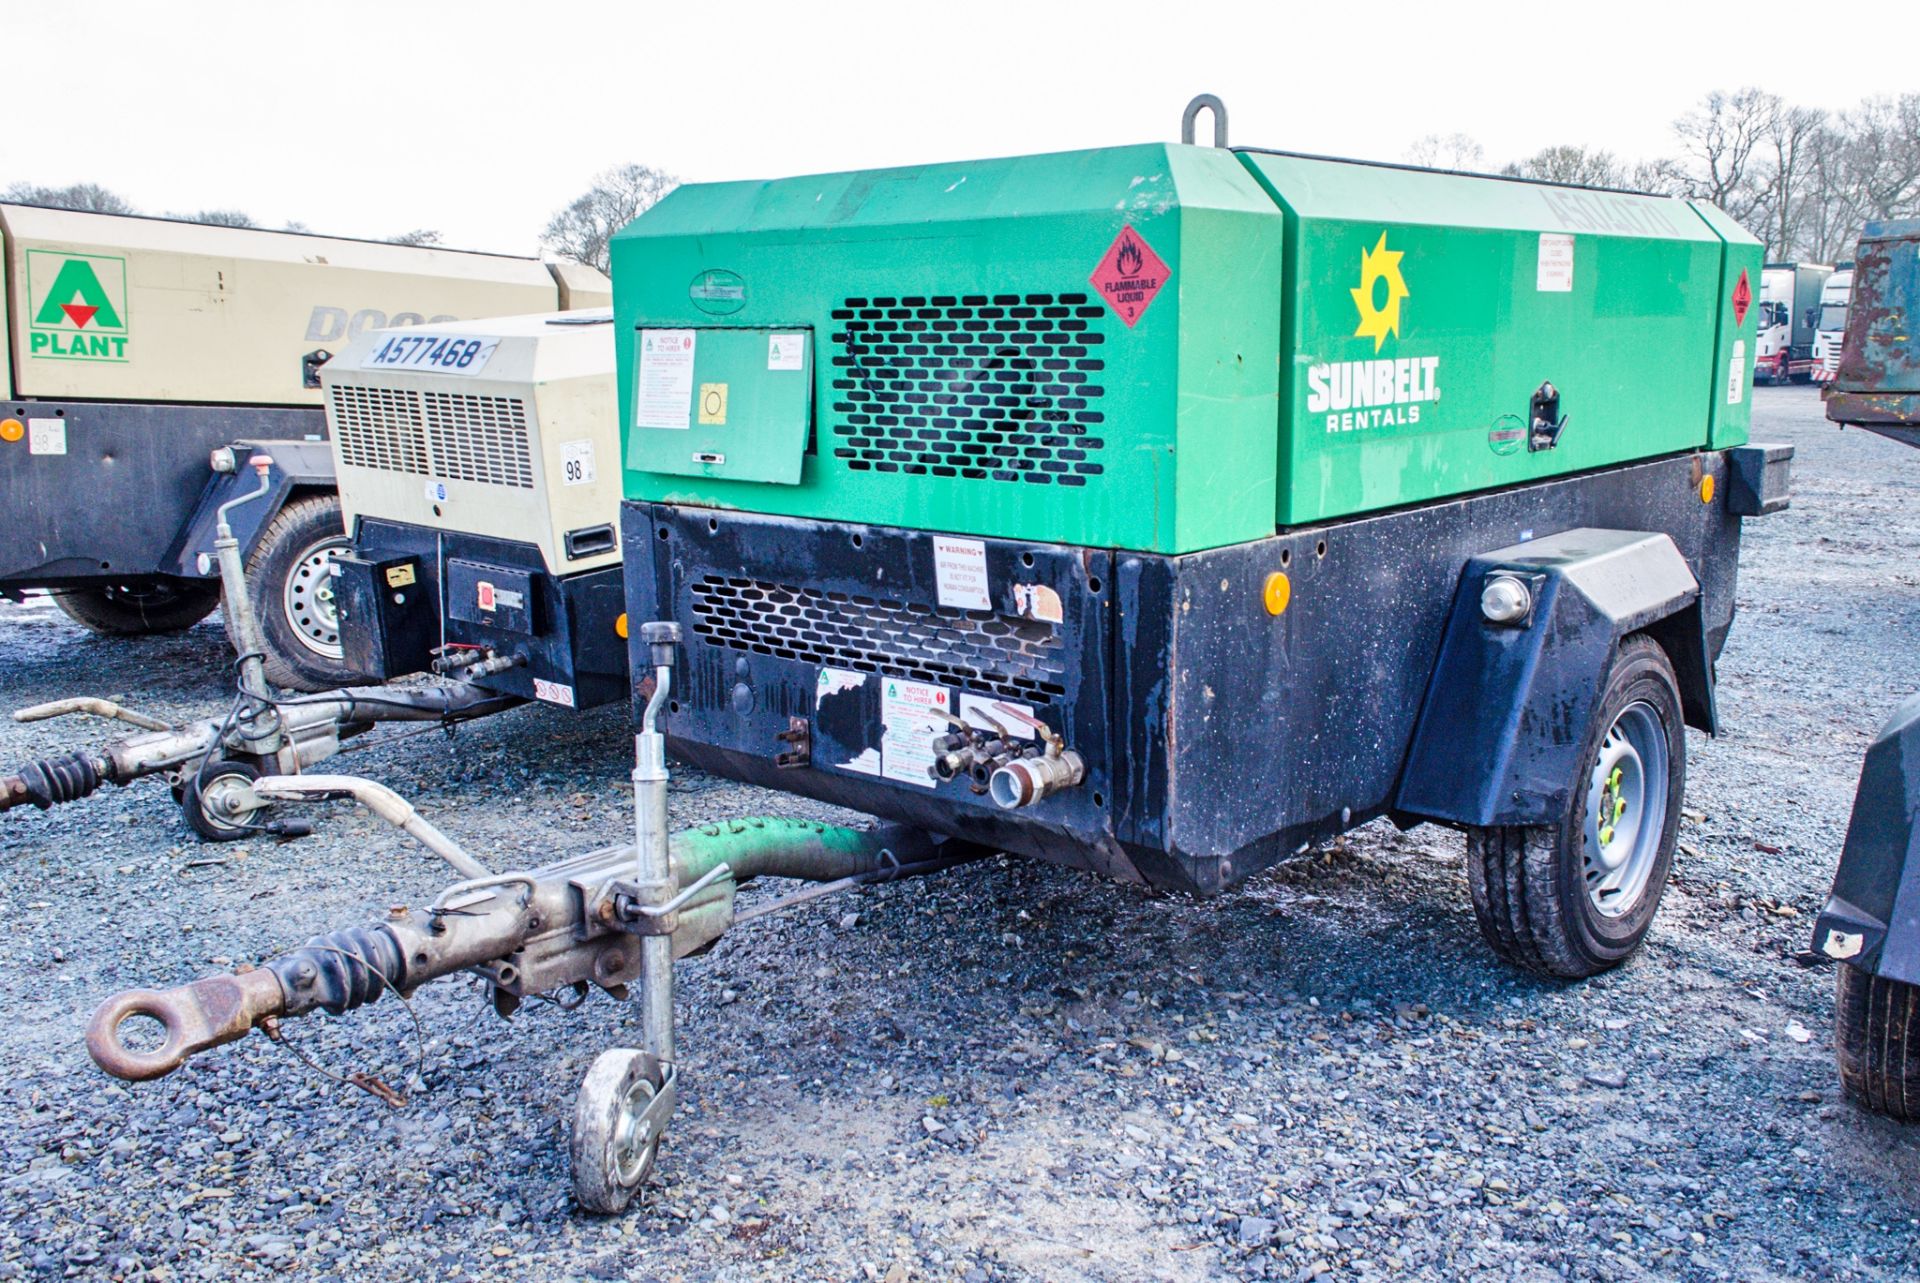 Doosan 7/71 diesel driven fast tow mobile air compressor Year: 2008 S/N: 522322 Recorded Hours: 2389